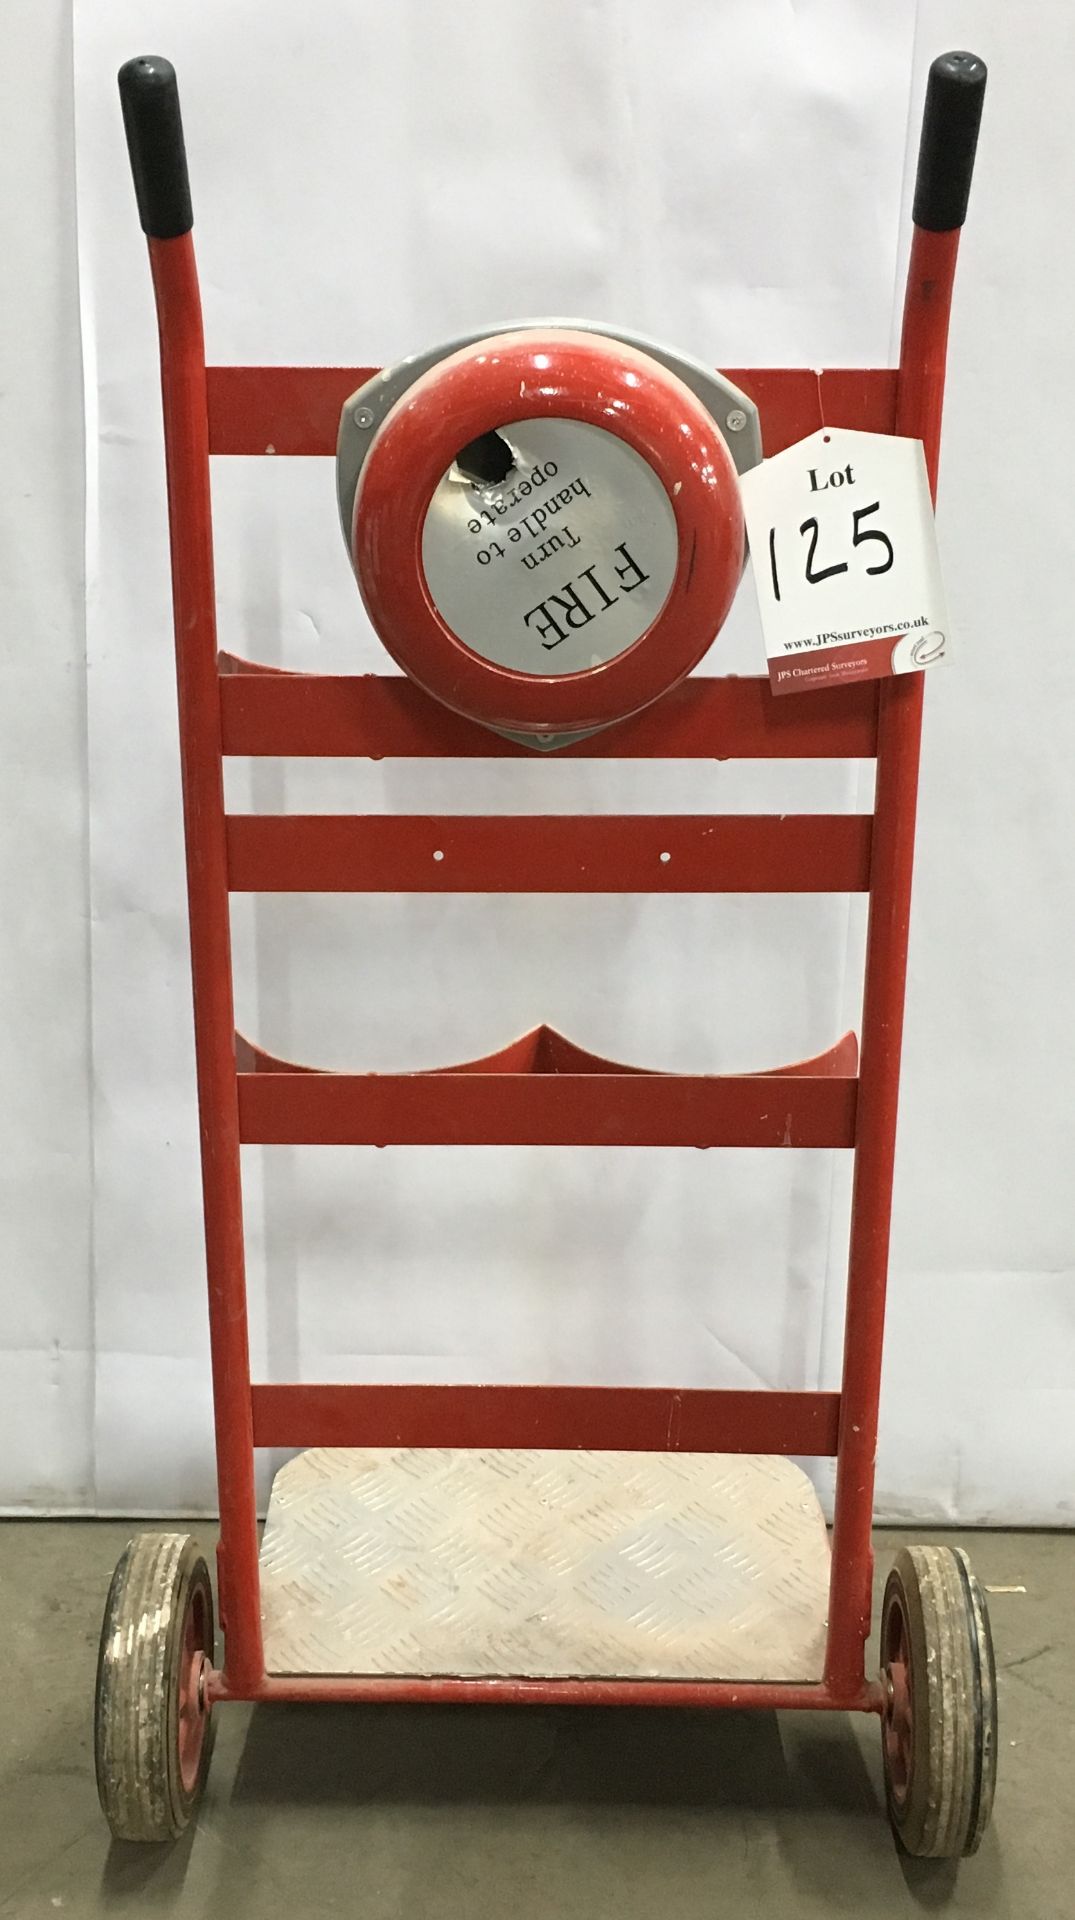 Fire Exit Trolley includes Fire Bell - This Trolley has a Damaged Handle